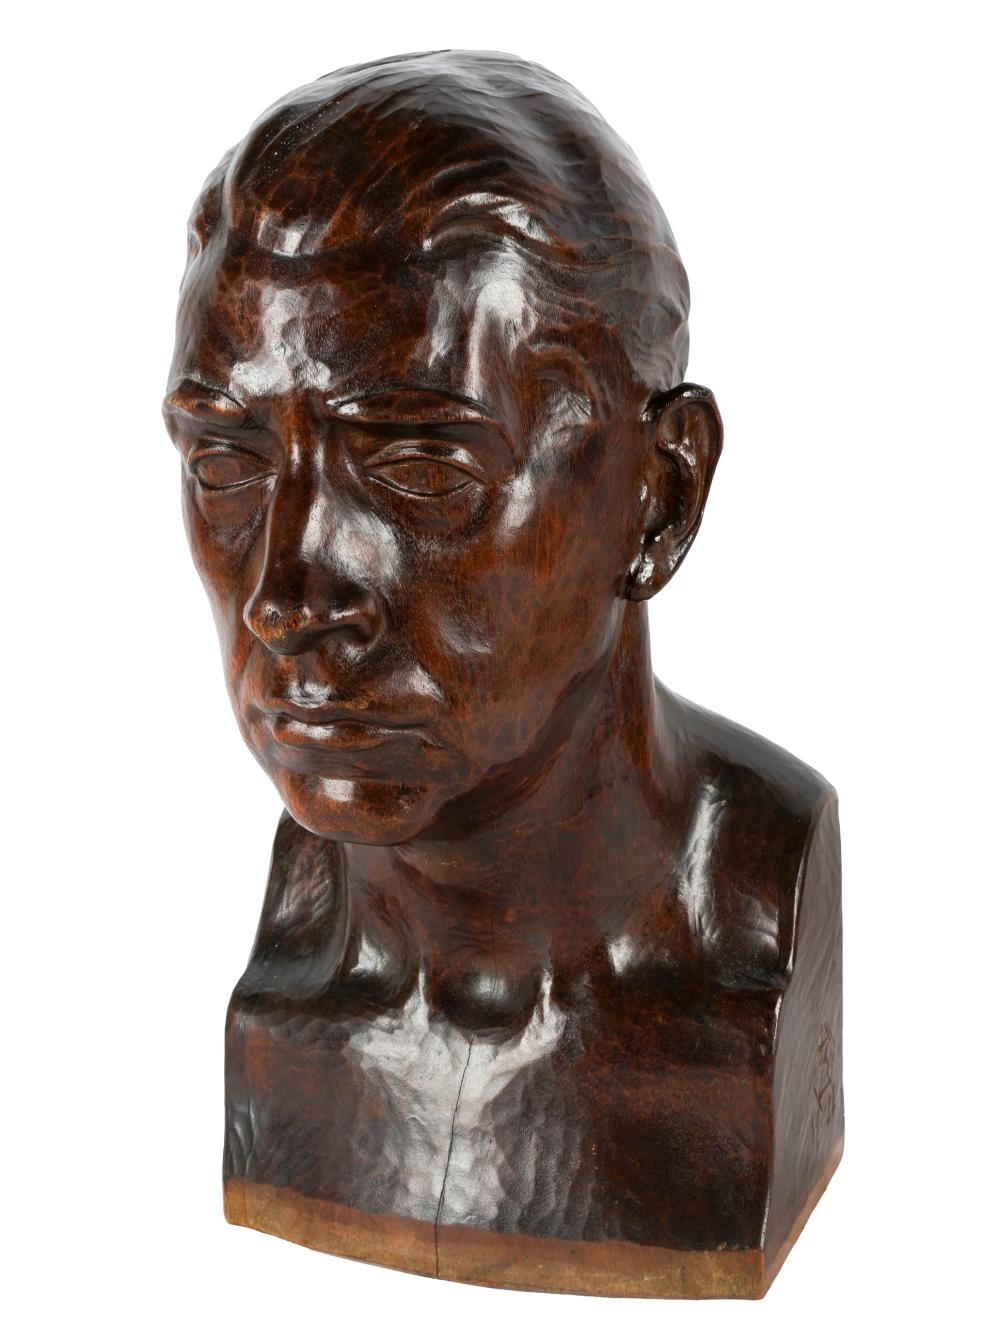 20TH CENTURY: HEAD OF A MANcarved